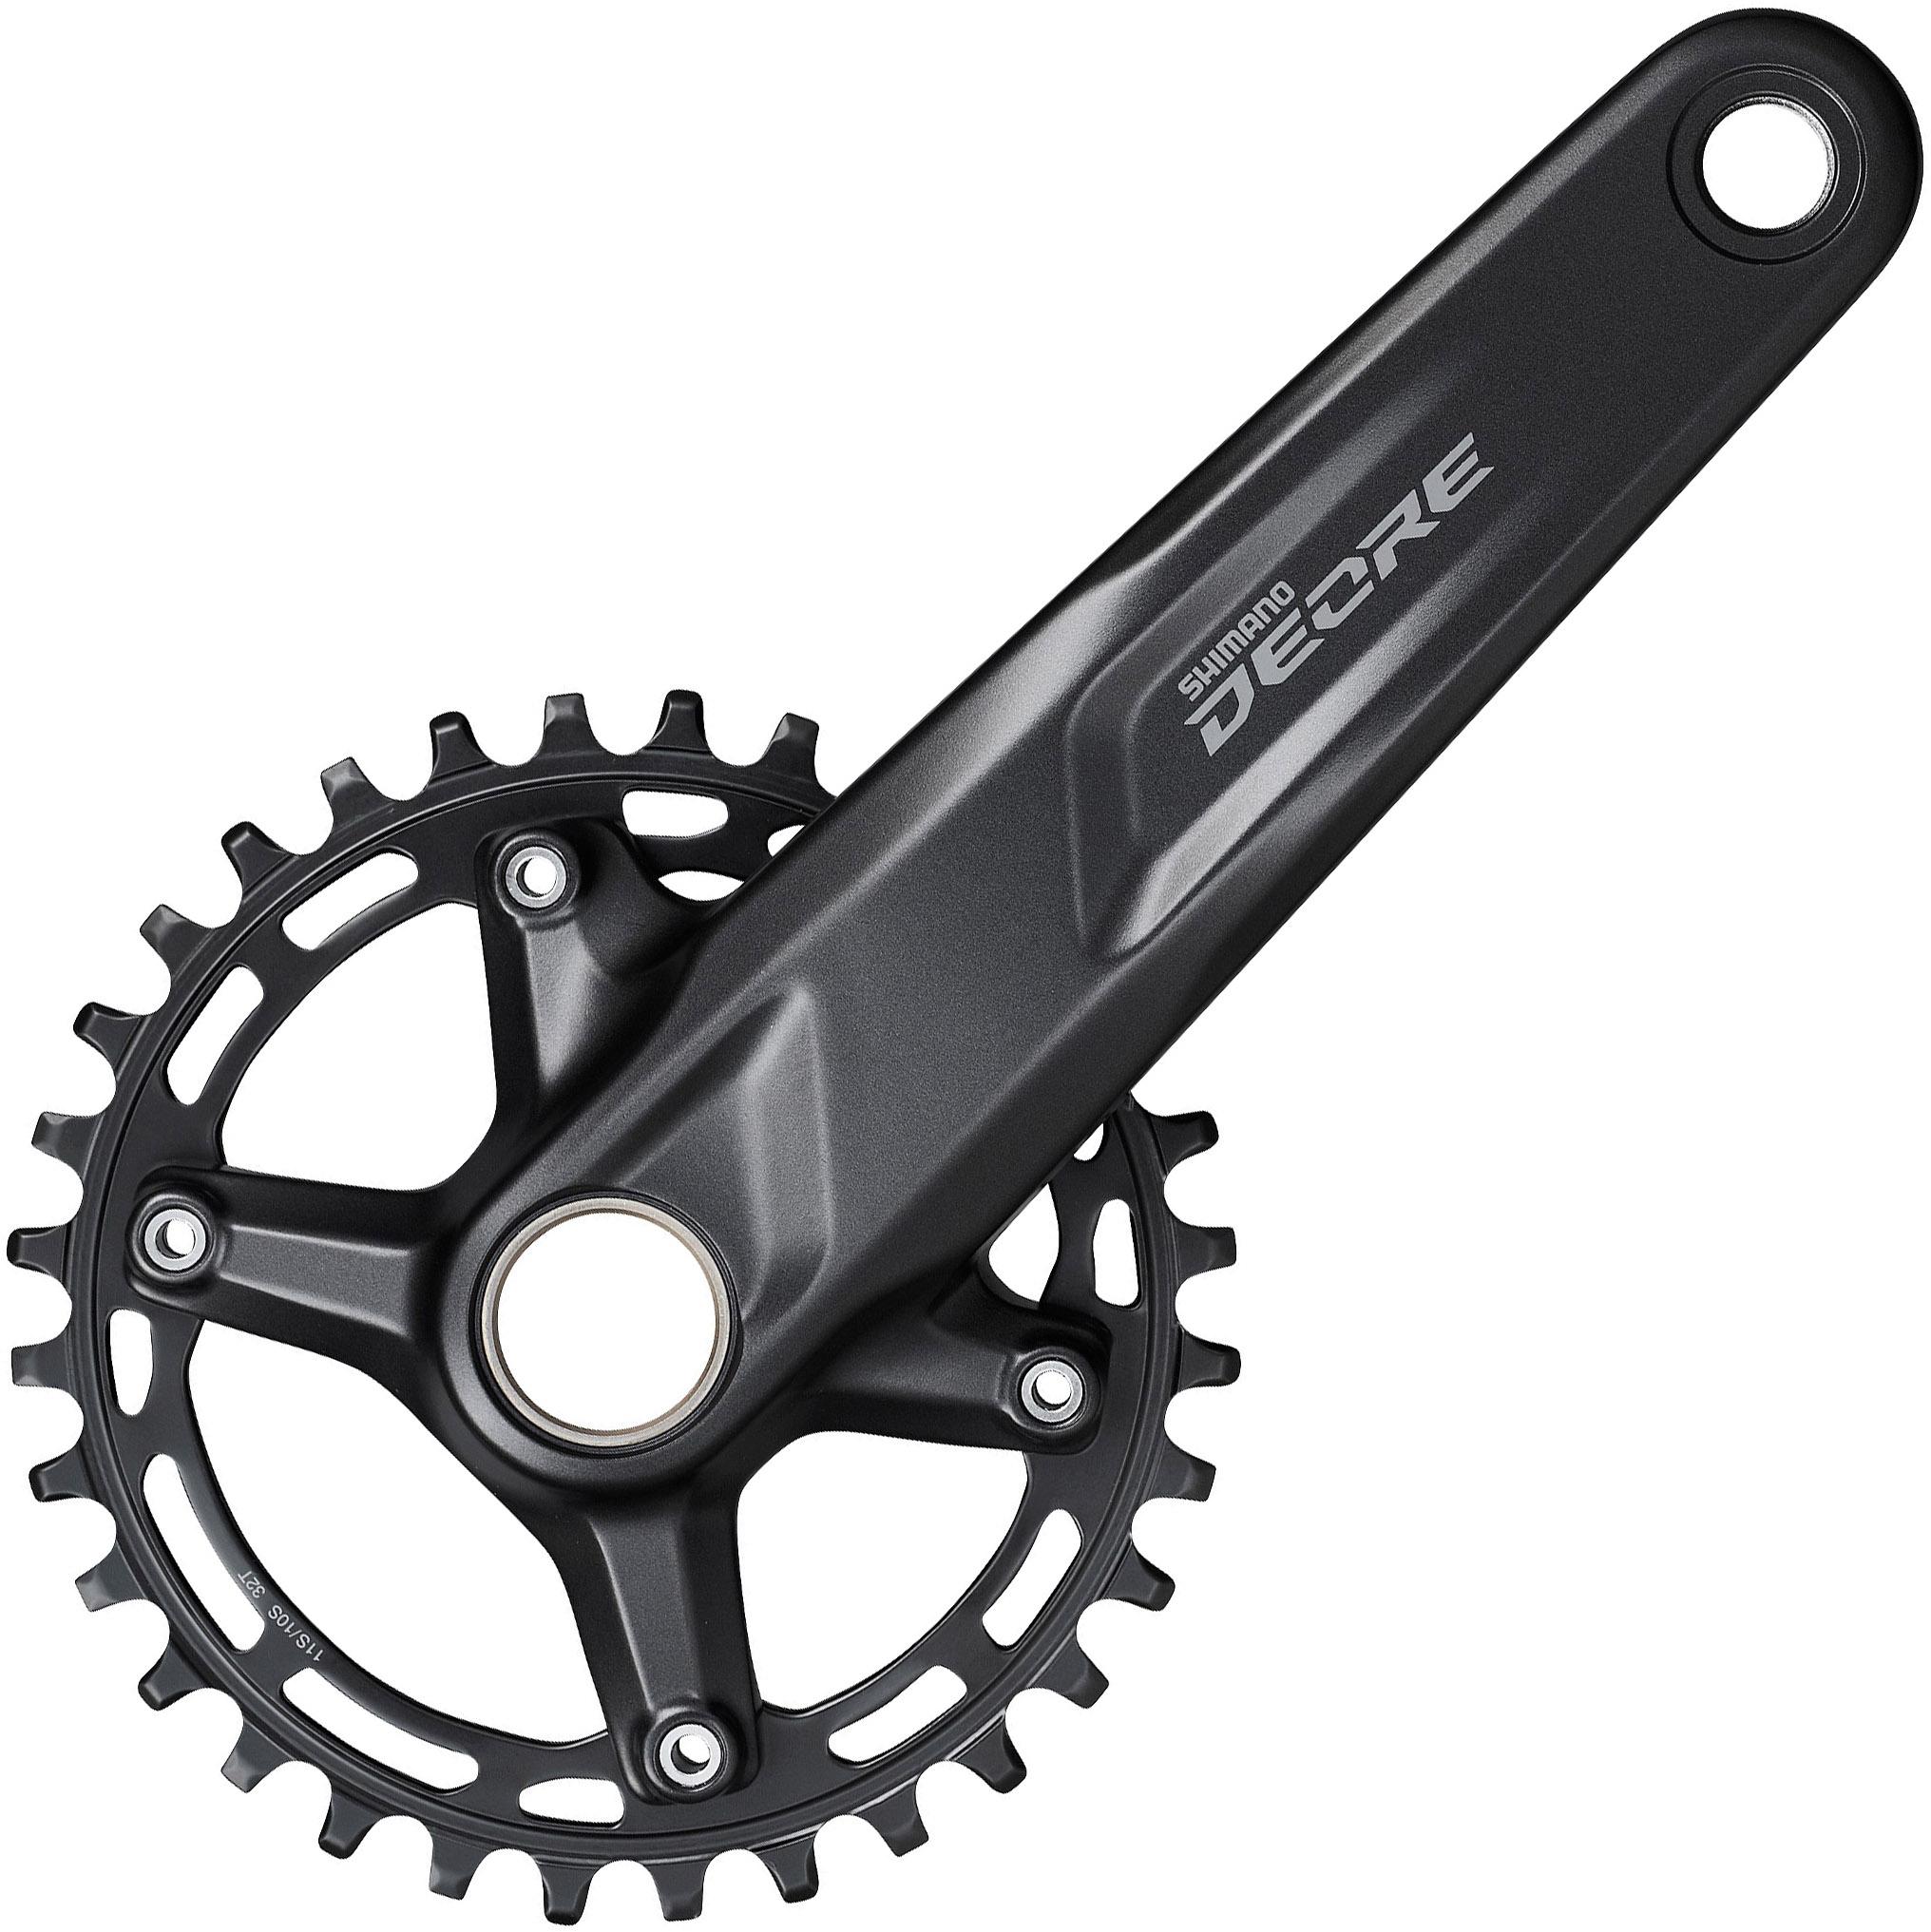 Shimano M5100 Deore 10/11 Speed Single Chainset - Black